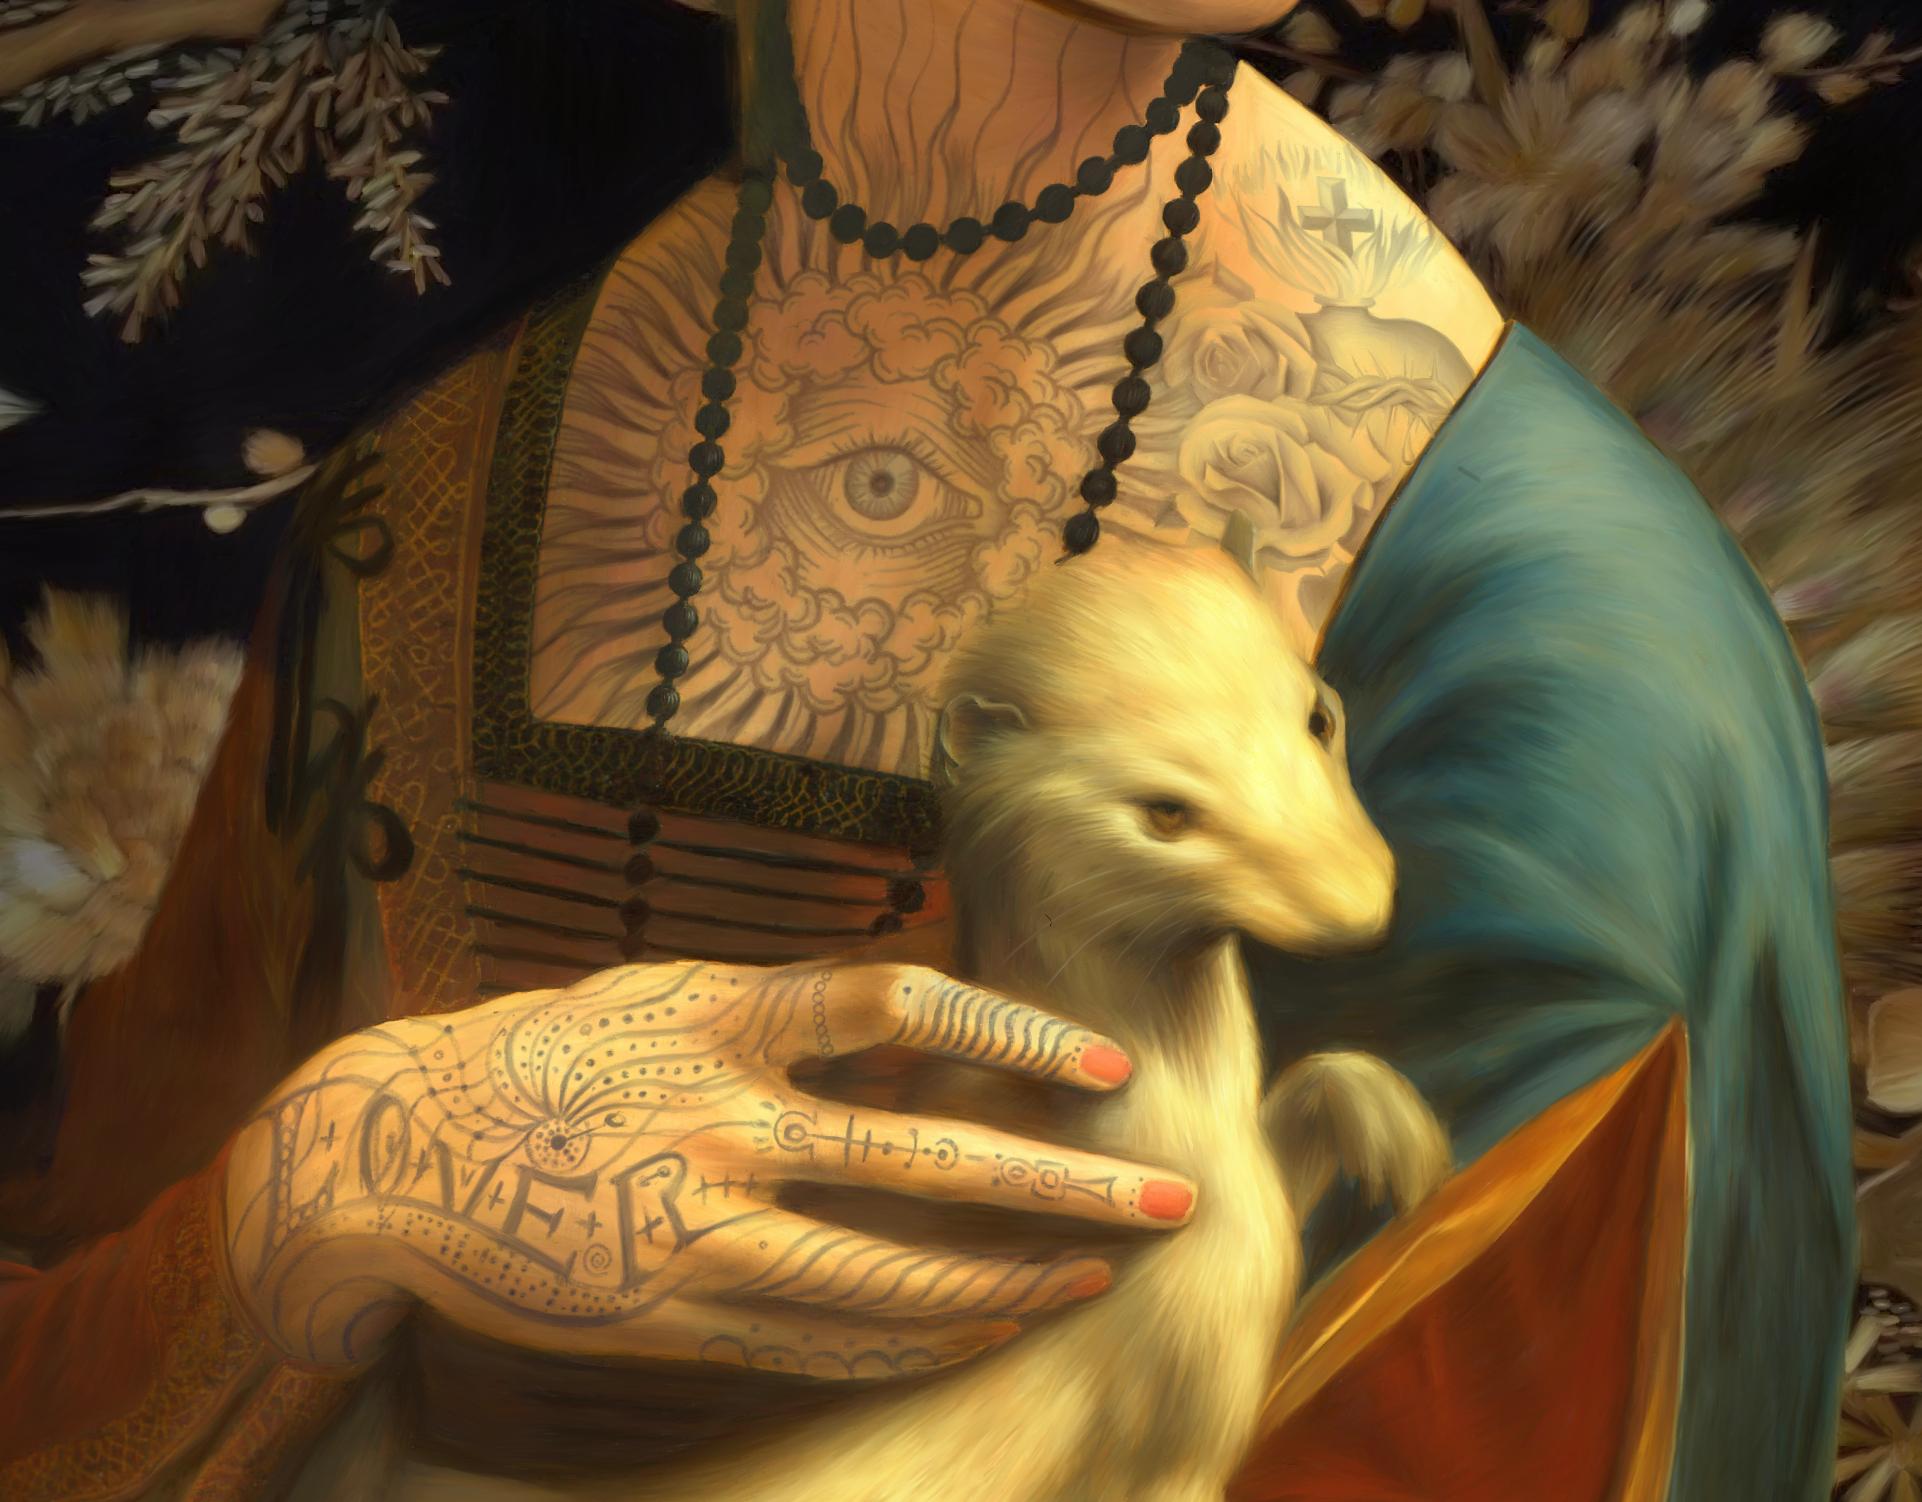 The Ink Lady. Based on the portrait Lady with an ermine, by Leonardo da Vinci.
Fine Art Giclée Pigmented Inkjet. Digital painting printed on museum quality canvas. Edition of 7.
Dimensions in centimetres 73 x 50 x 3 cm
In inches  28.74 x 19.69 x